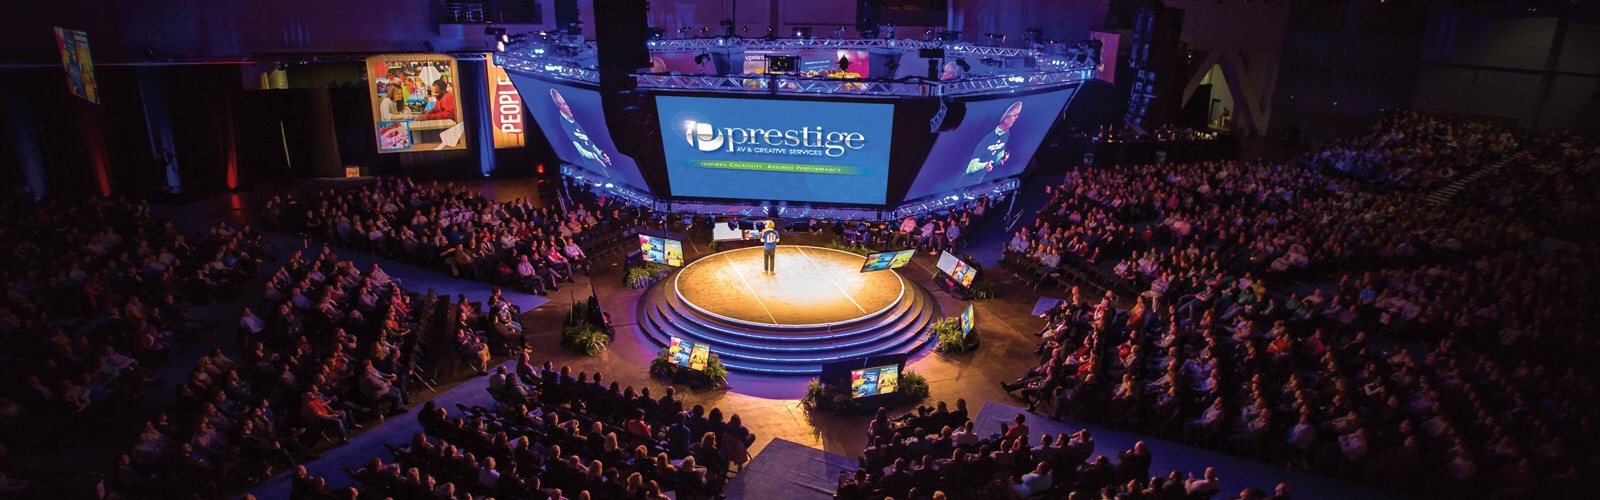 Prestige AV & Creative Services supports corporate meetings of all sizes including this “in the round” multi-screen set for 4,000 attendees.